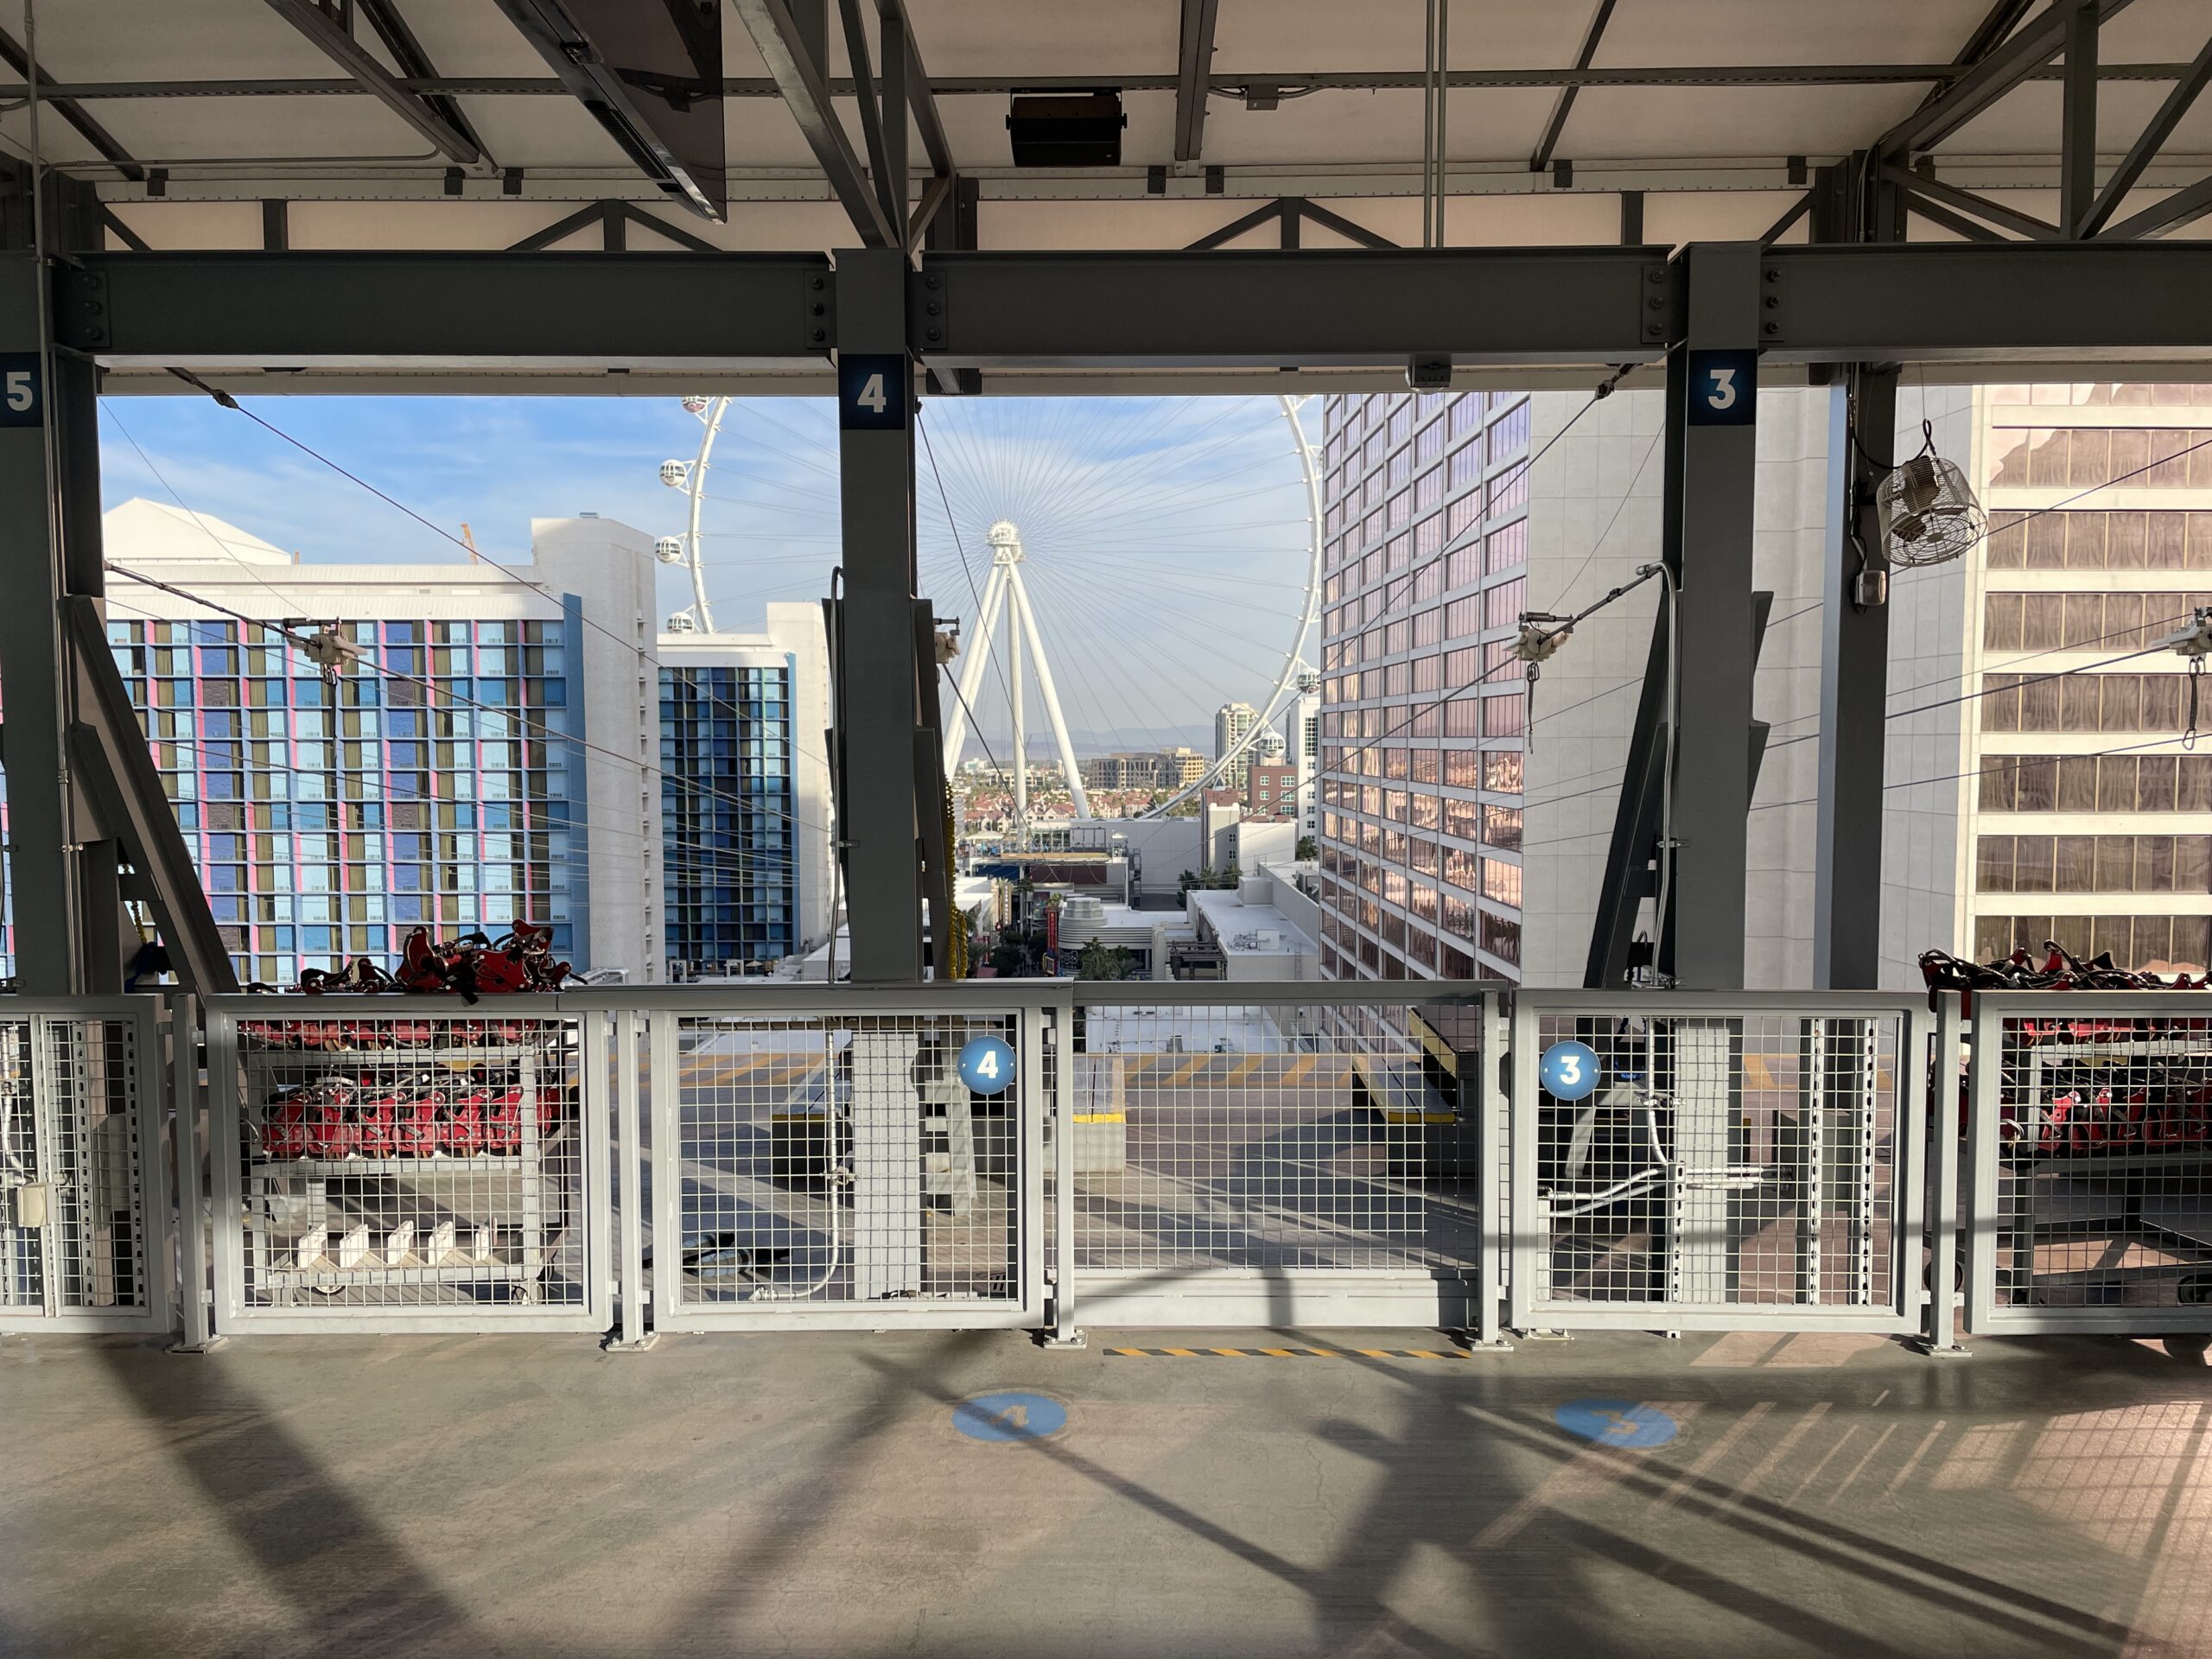 View from the launch deck at FlyLINQ. Linq is on the left and Flamingo is on the right. The high roller observation wheel is in the background.